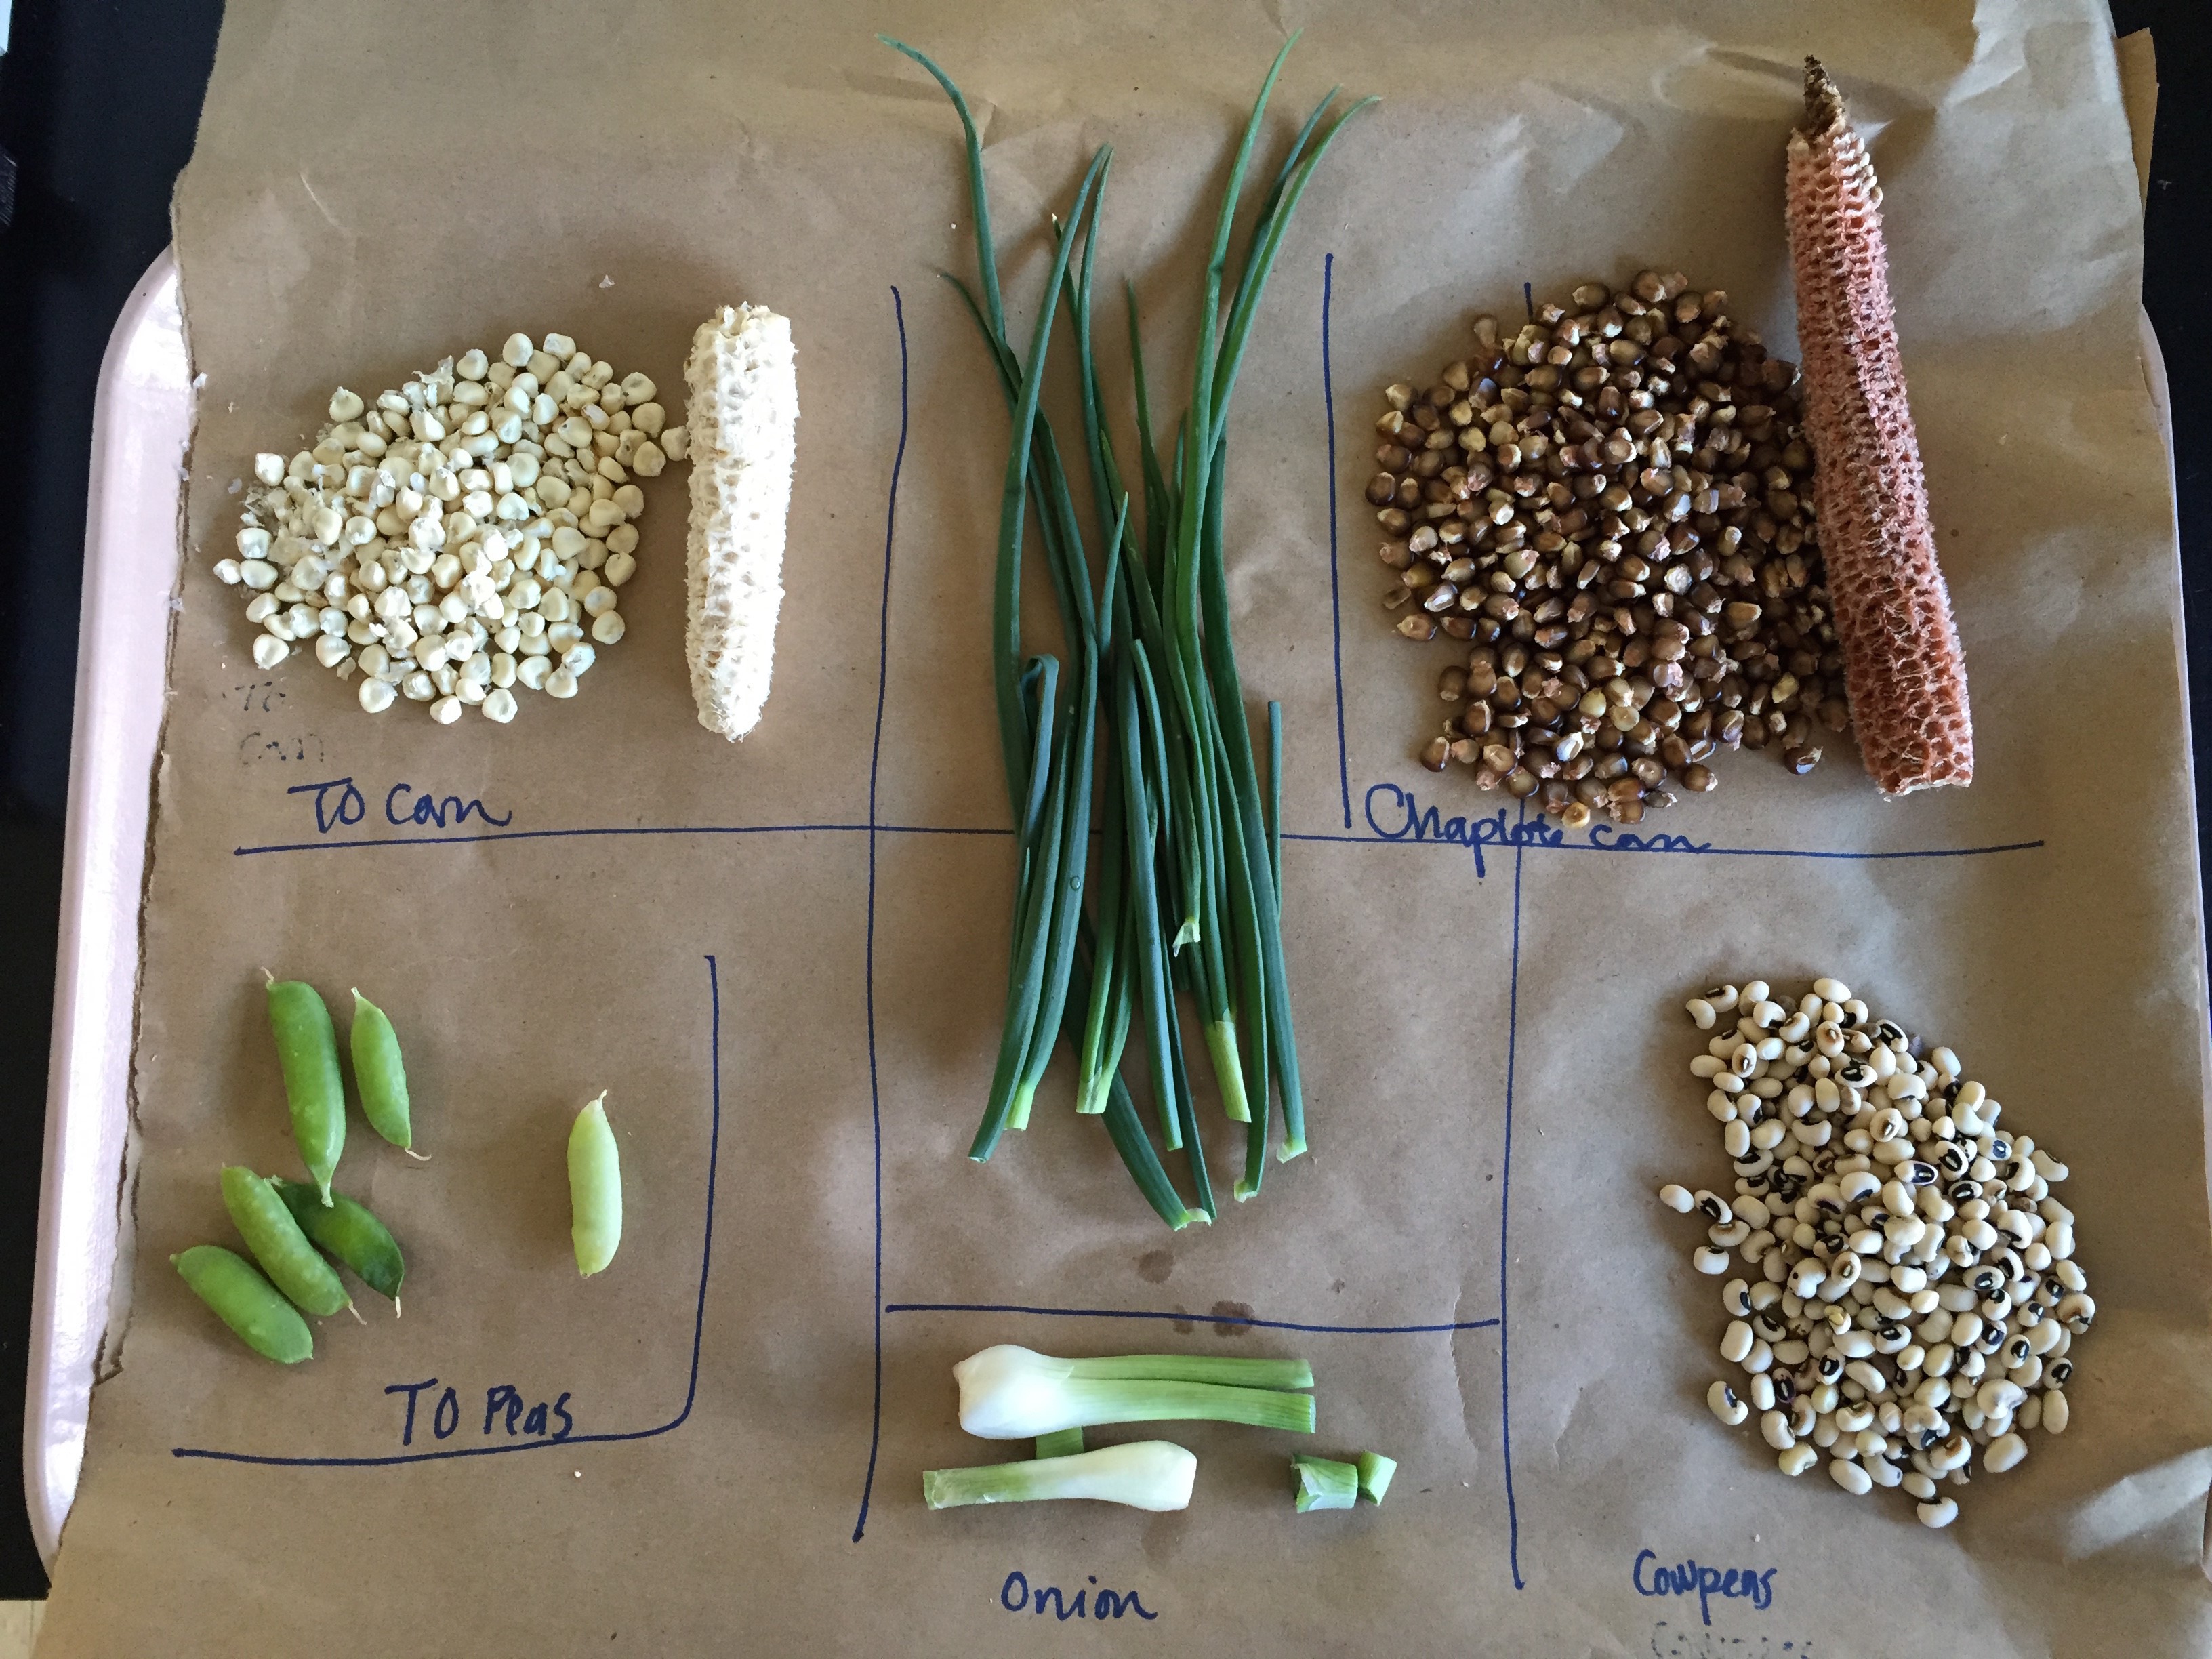 Crops from local gardens used to assess regional contaminant impact to soil and water supplies